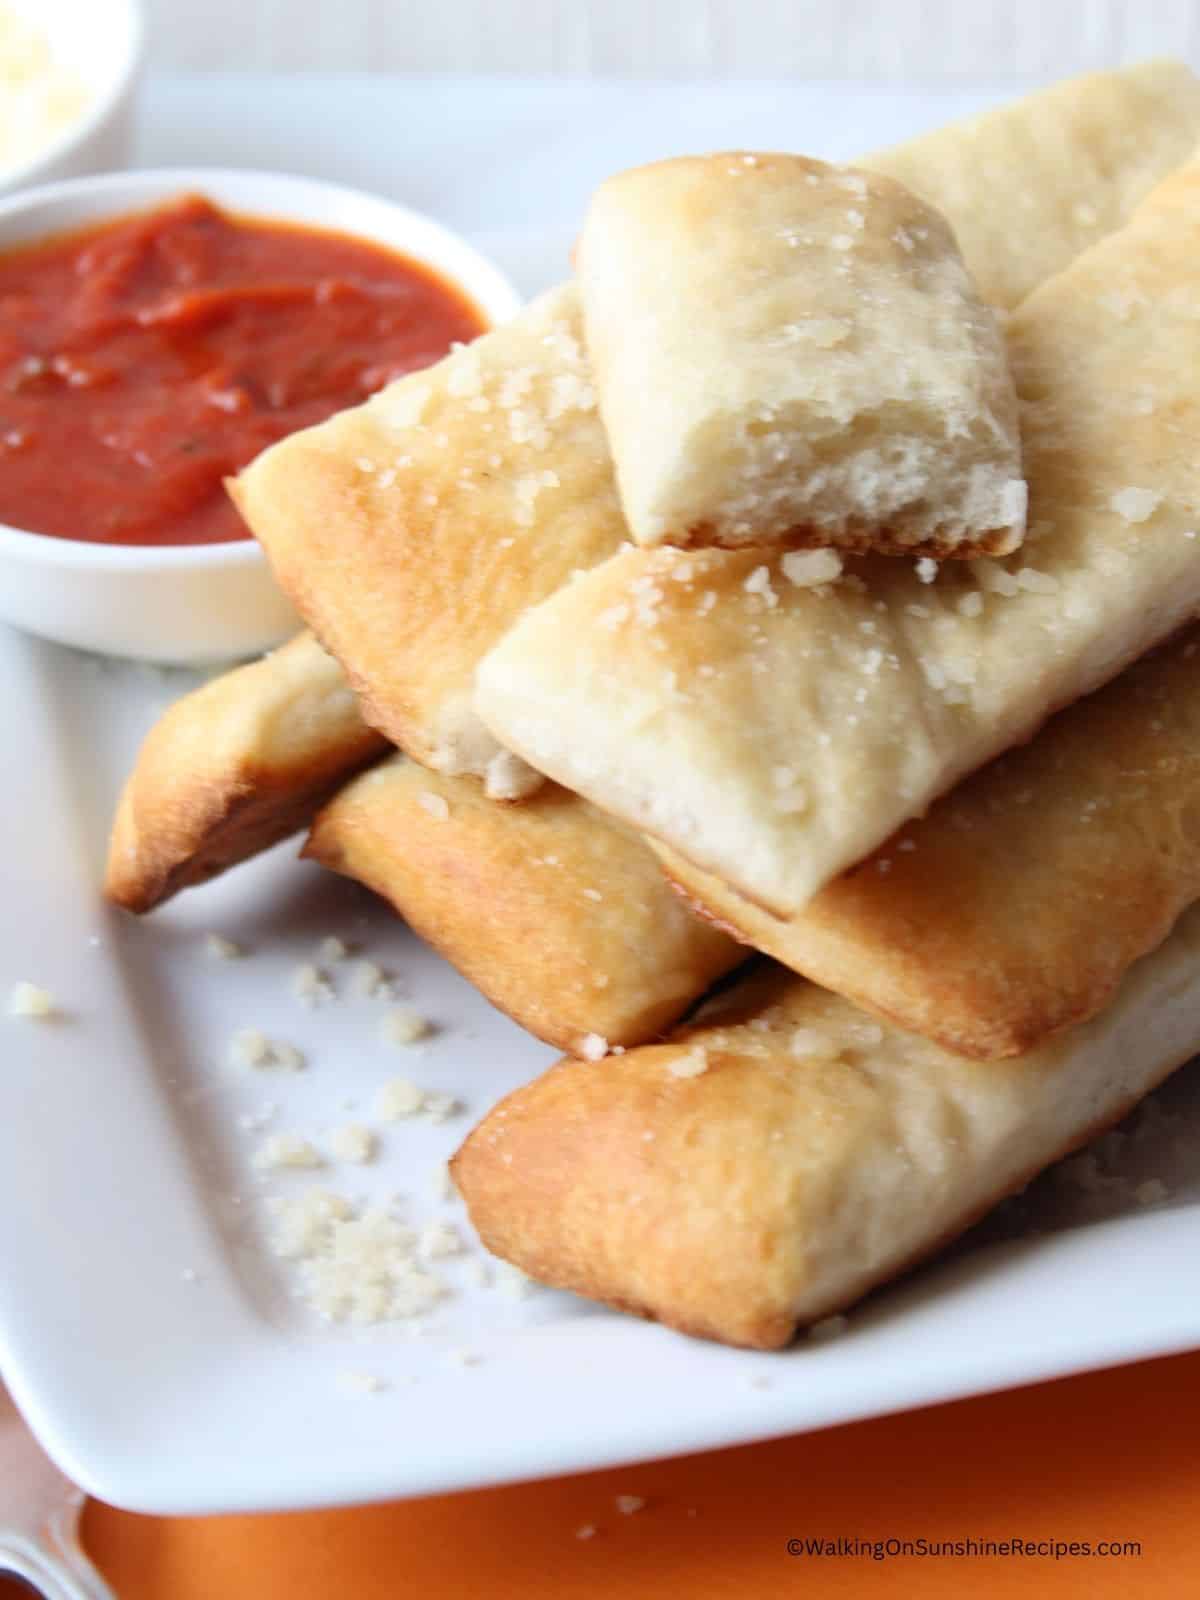 Breadsticks on white plate with small bowl of tomato sauce.